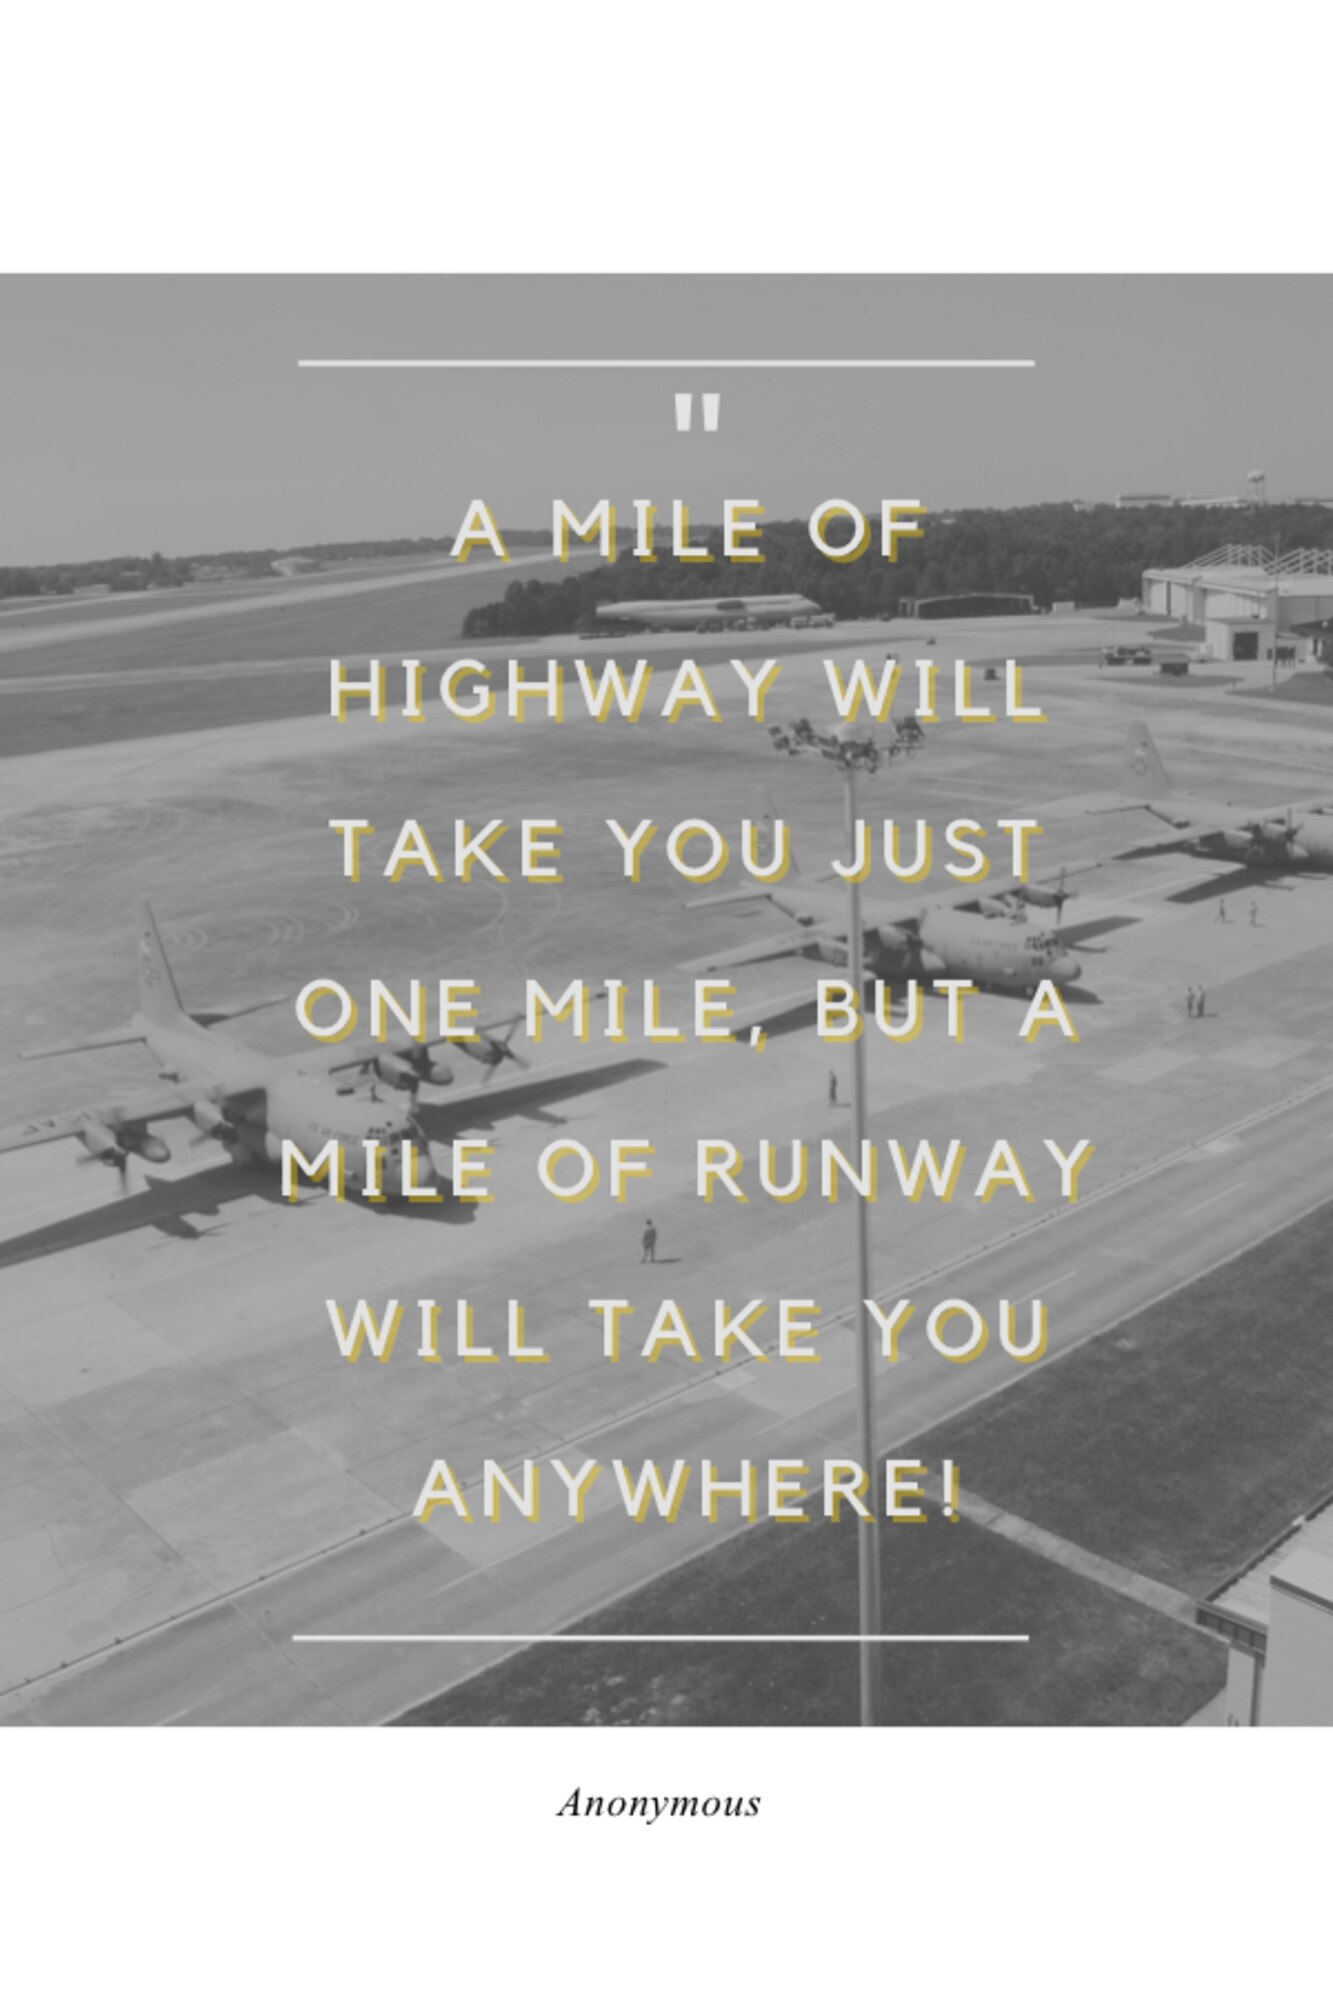 This week's motivation is from an anonymous source:

"A mile of highway will take you just one mile, but a mile of runway will take you anywhere!"